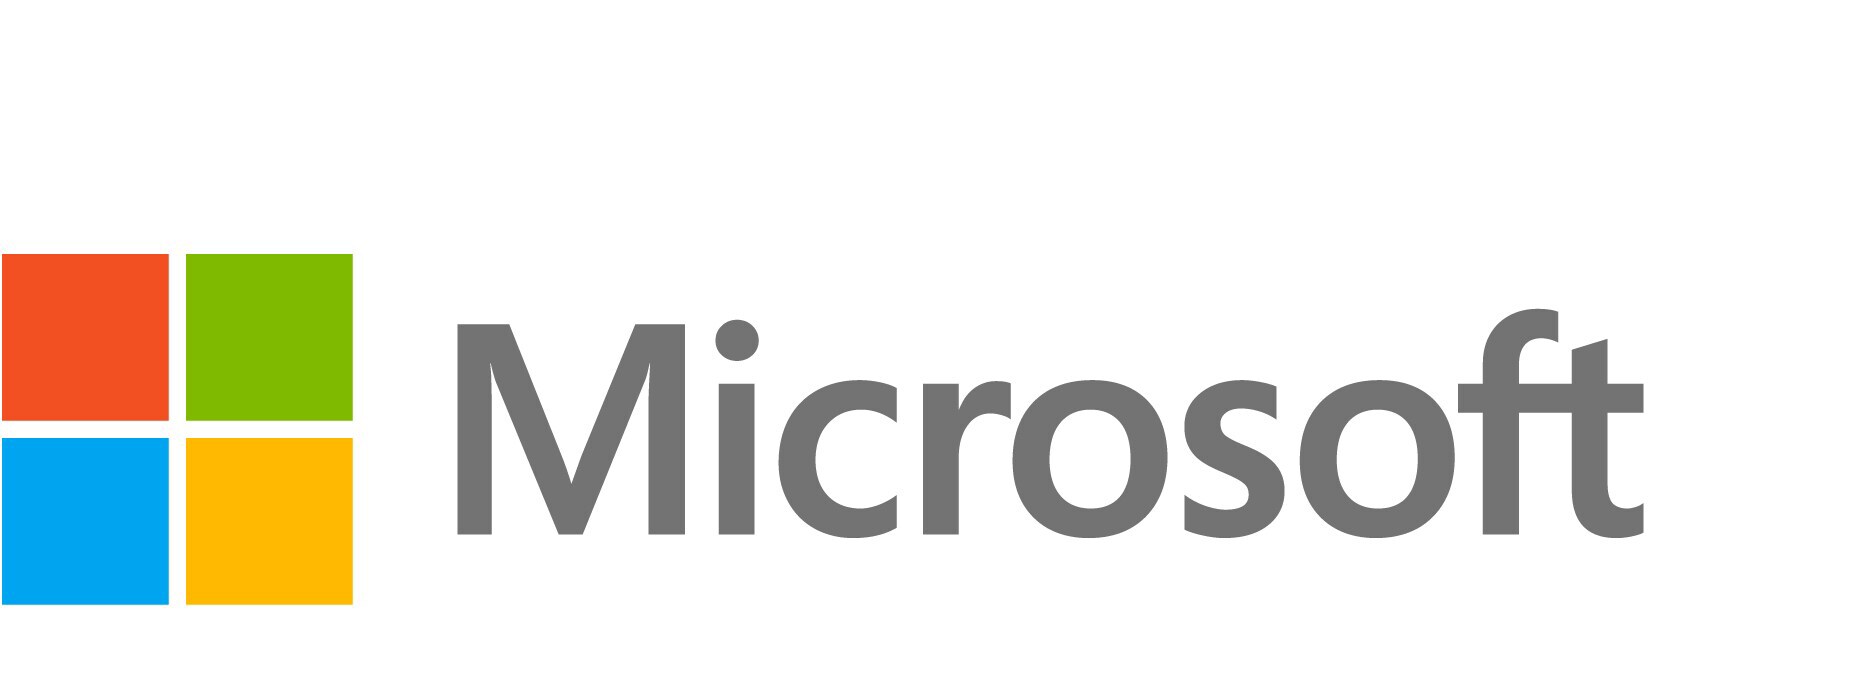 Microsoft 3 Year Extended Hardware Service Protection Plan-Surface Type Cover